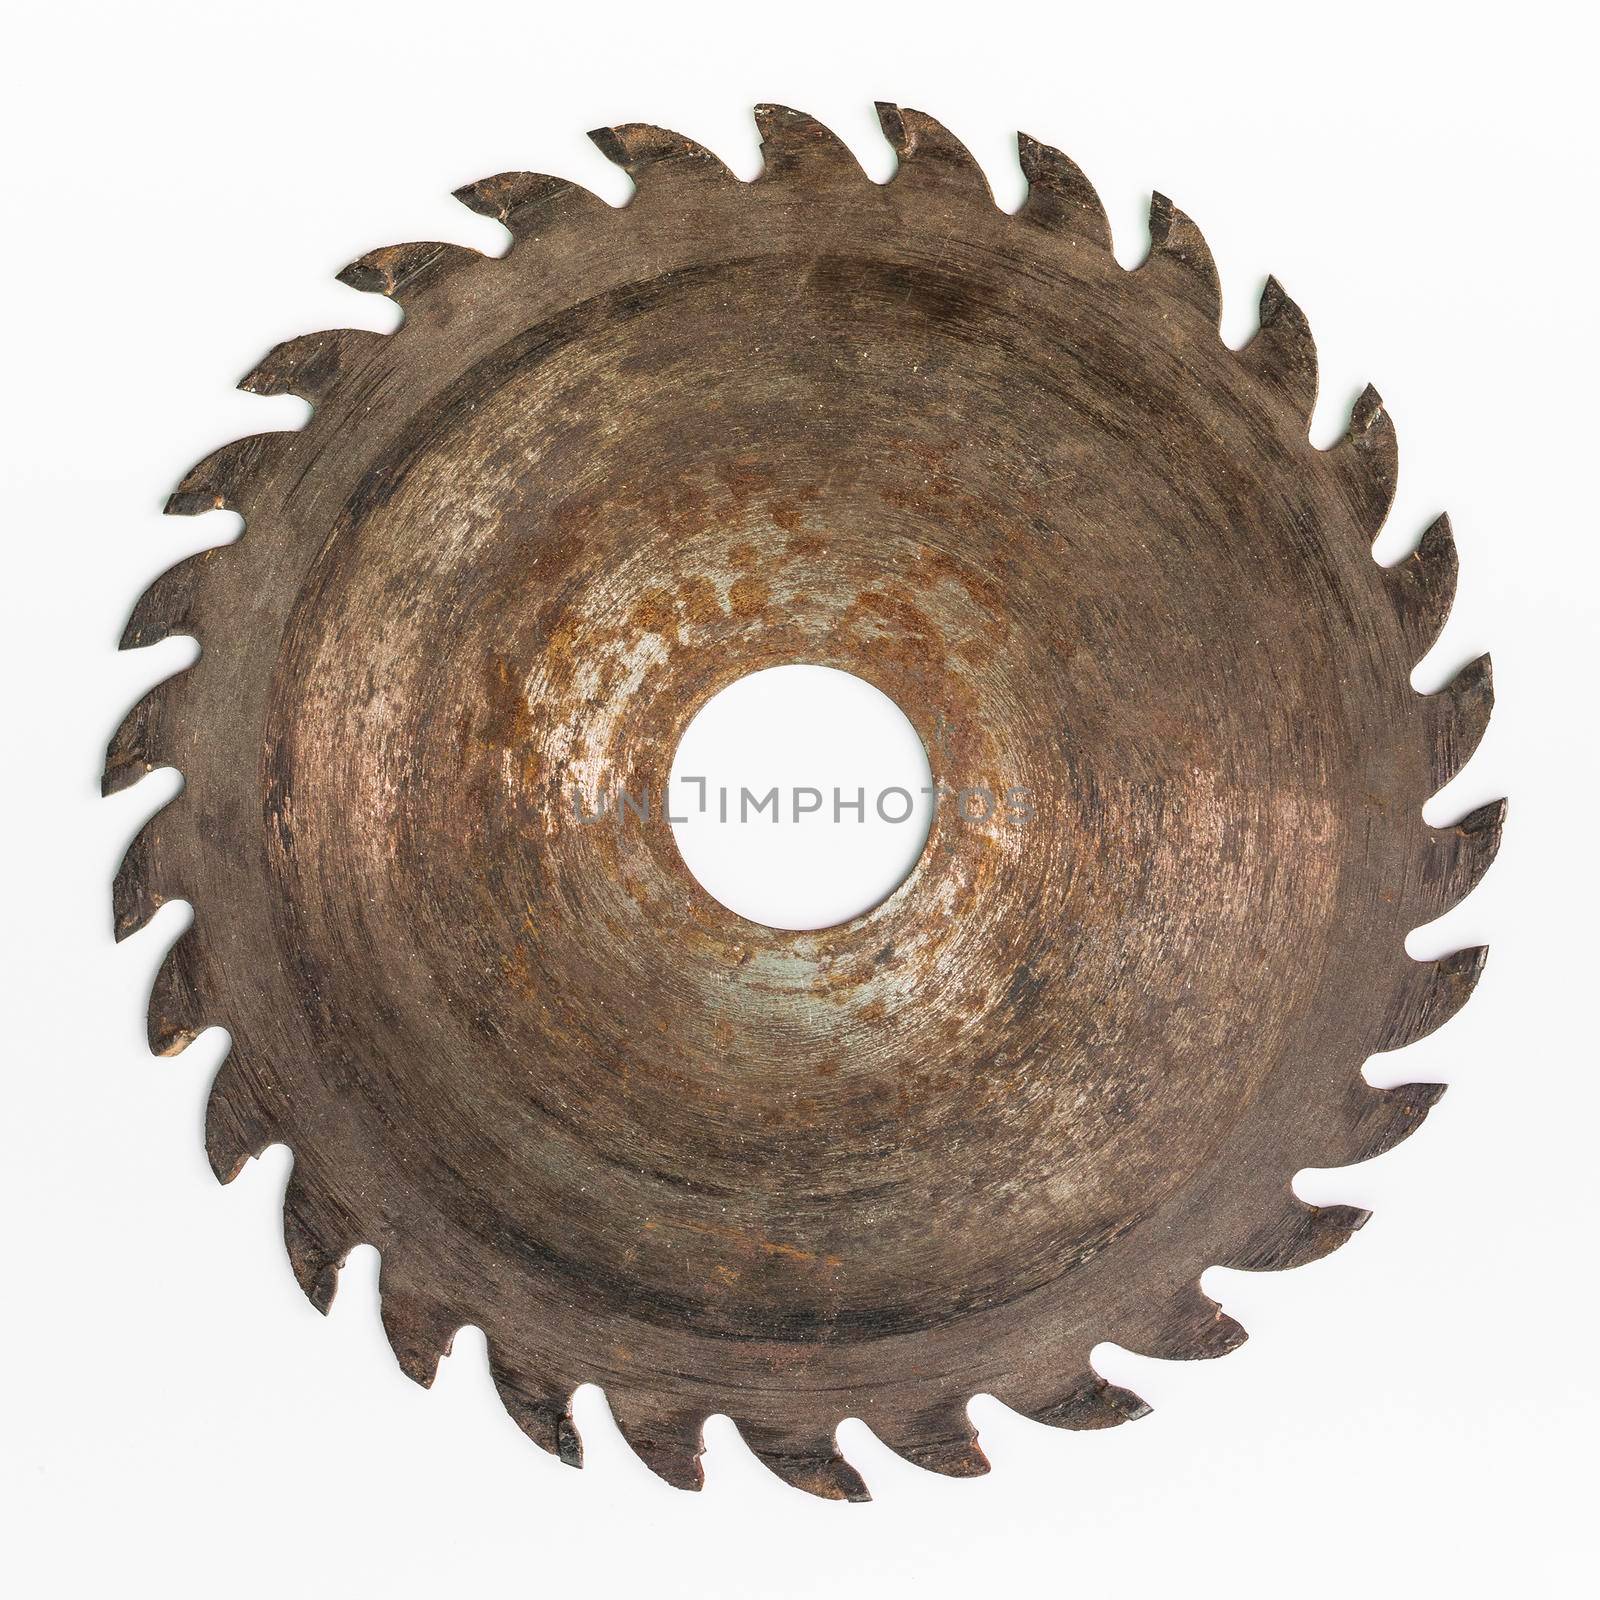 Concrete cutting blade on a white background by titipong